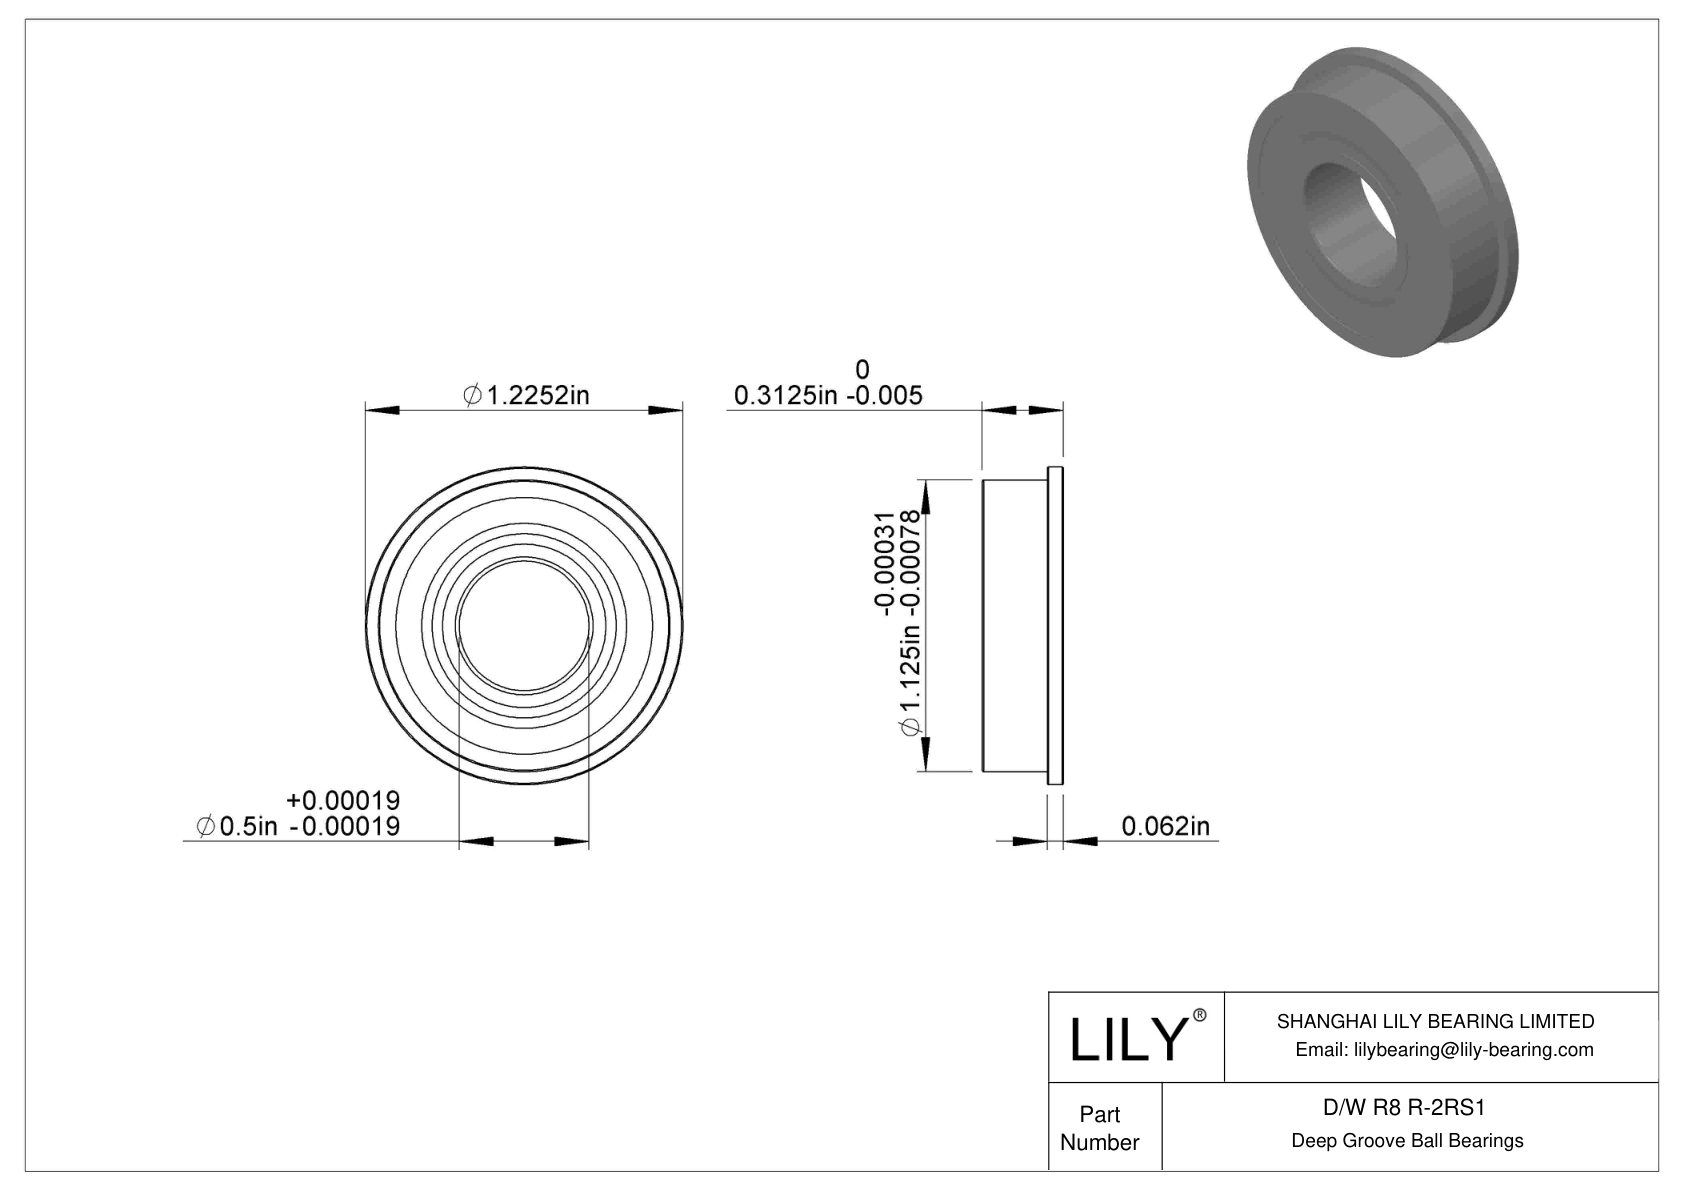 D/W R8 R-2RS1 Flanged Ball Bearings cad drawing